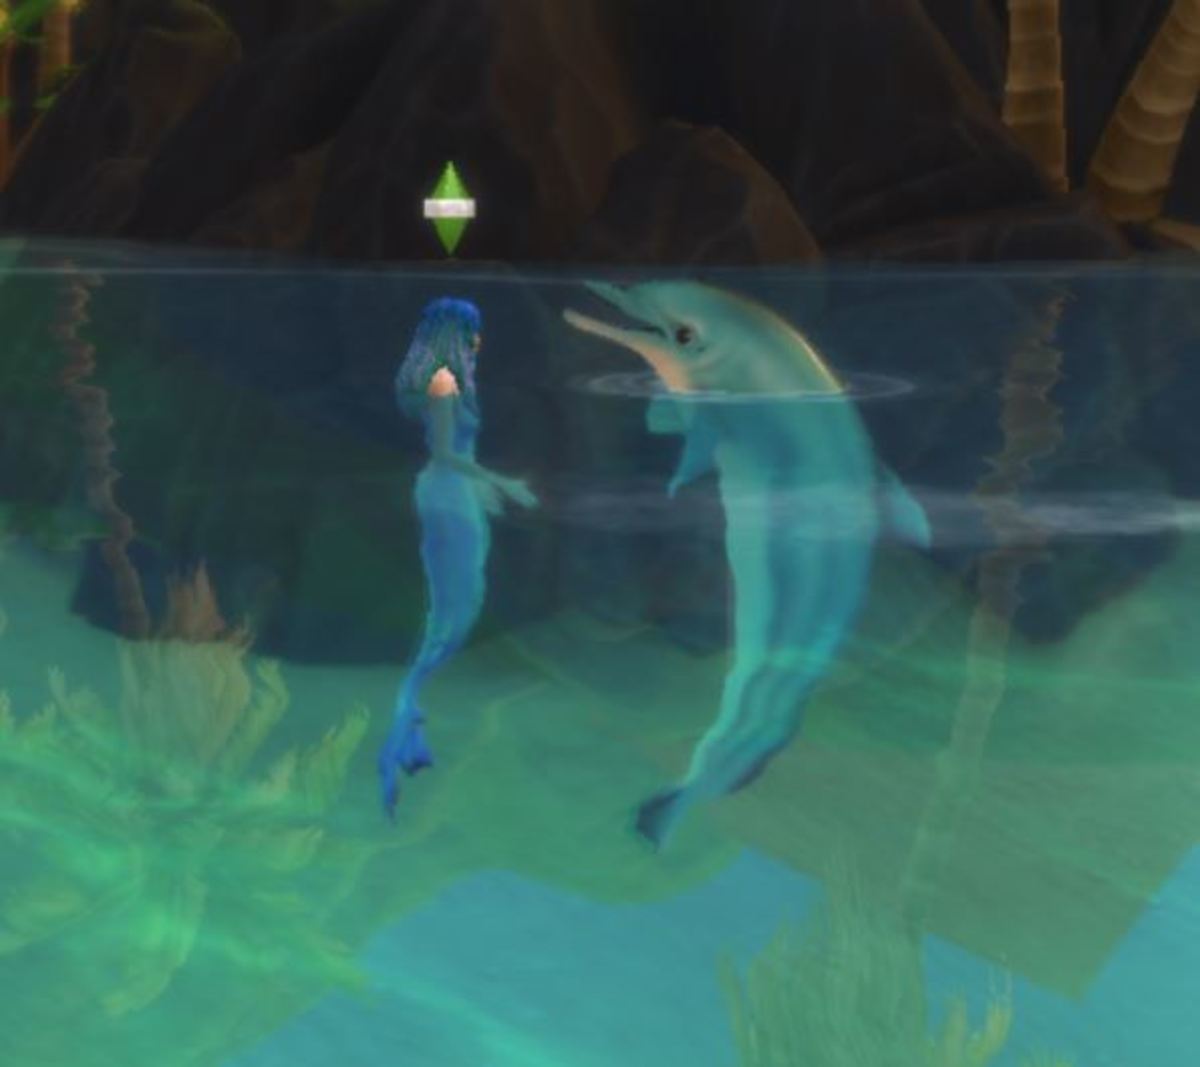 Interacting with dolphins is probably my favorite new feature!